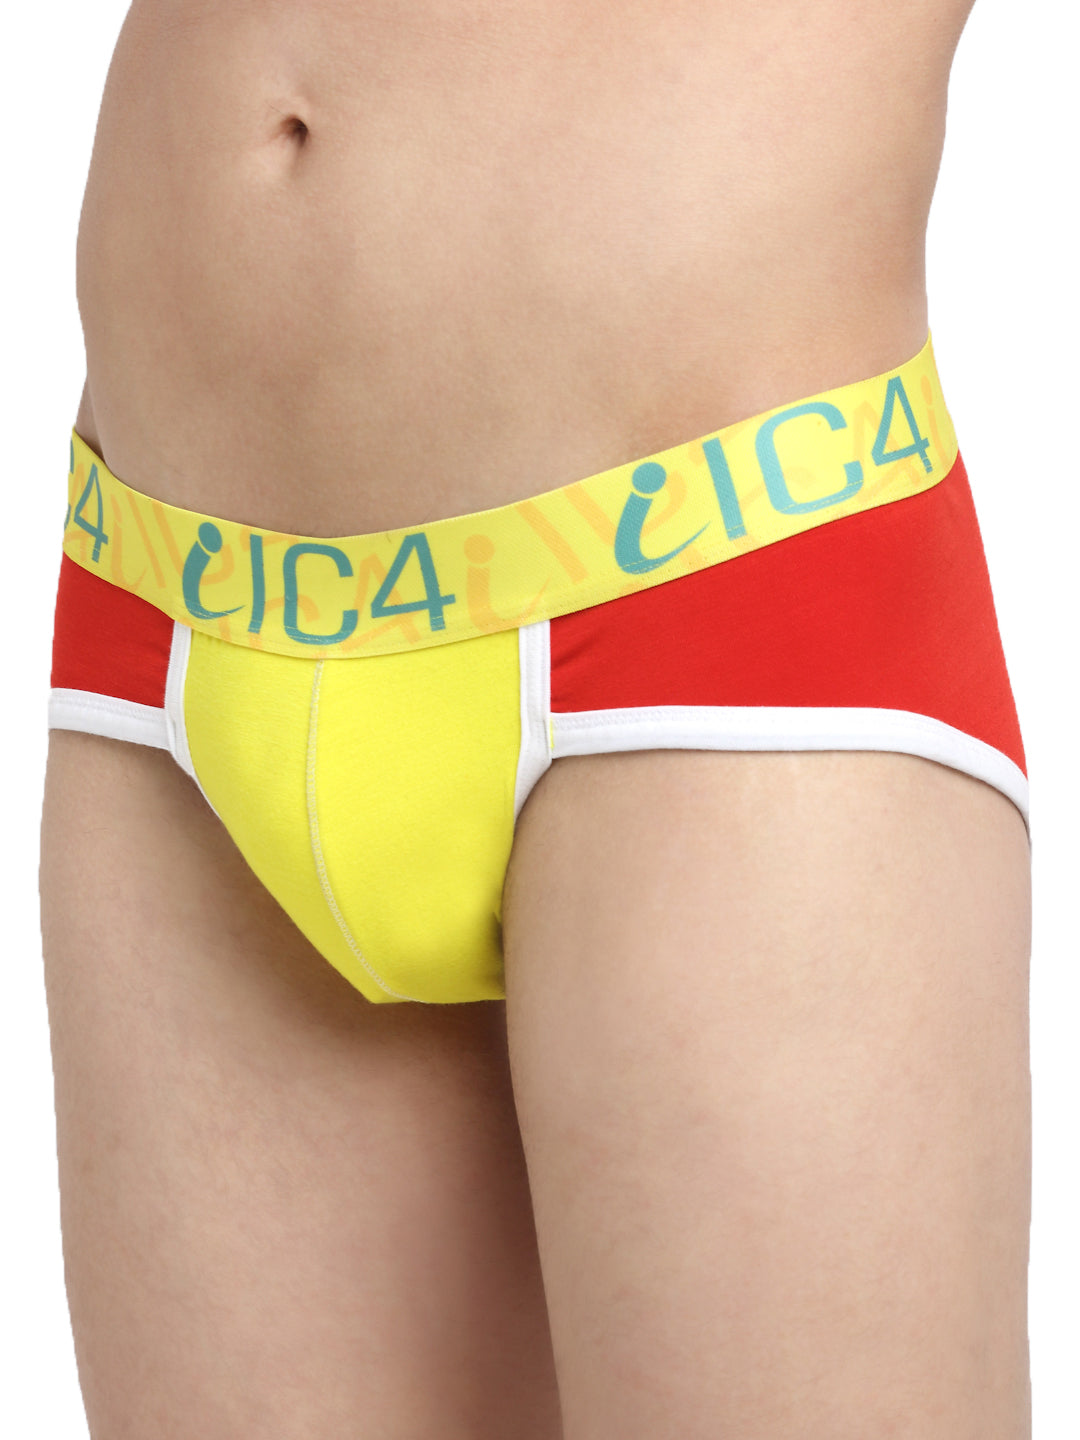 IC4 Men's Fashion Brief - Red-Yellow